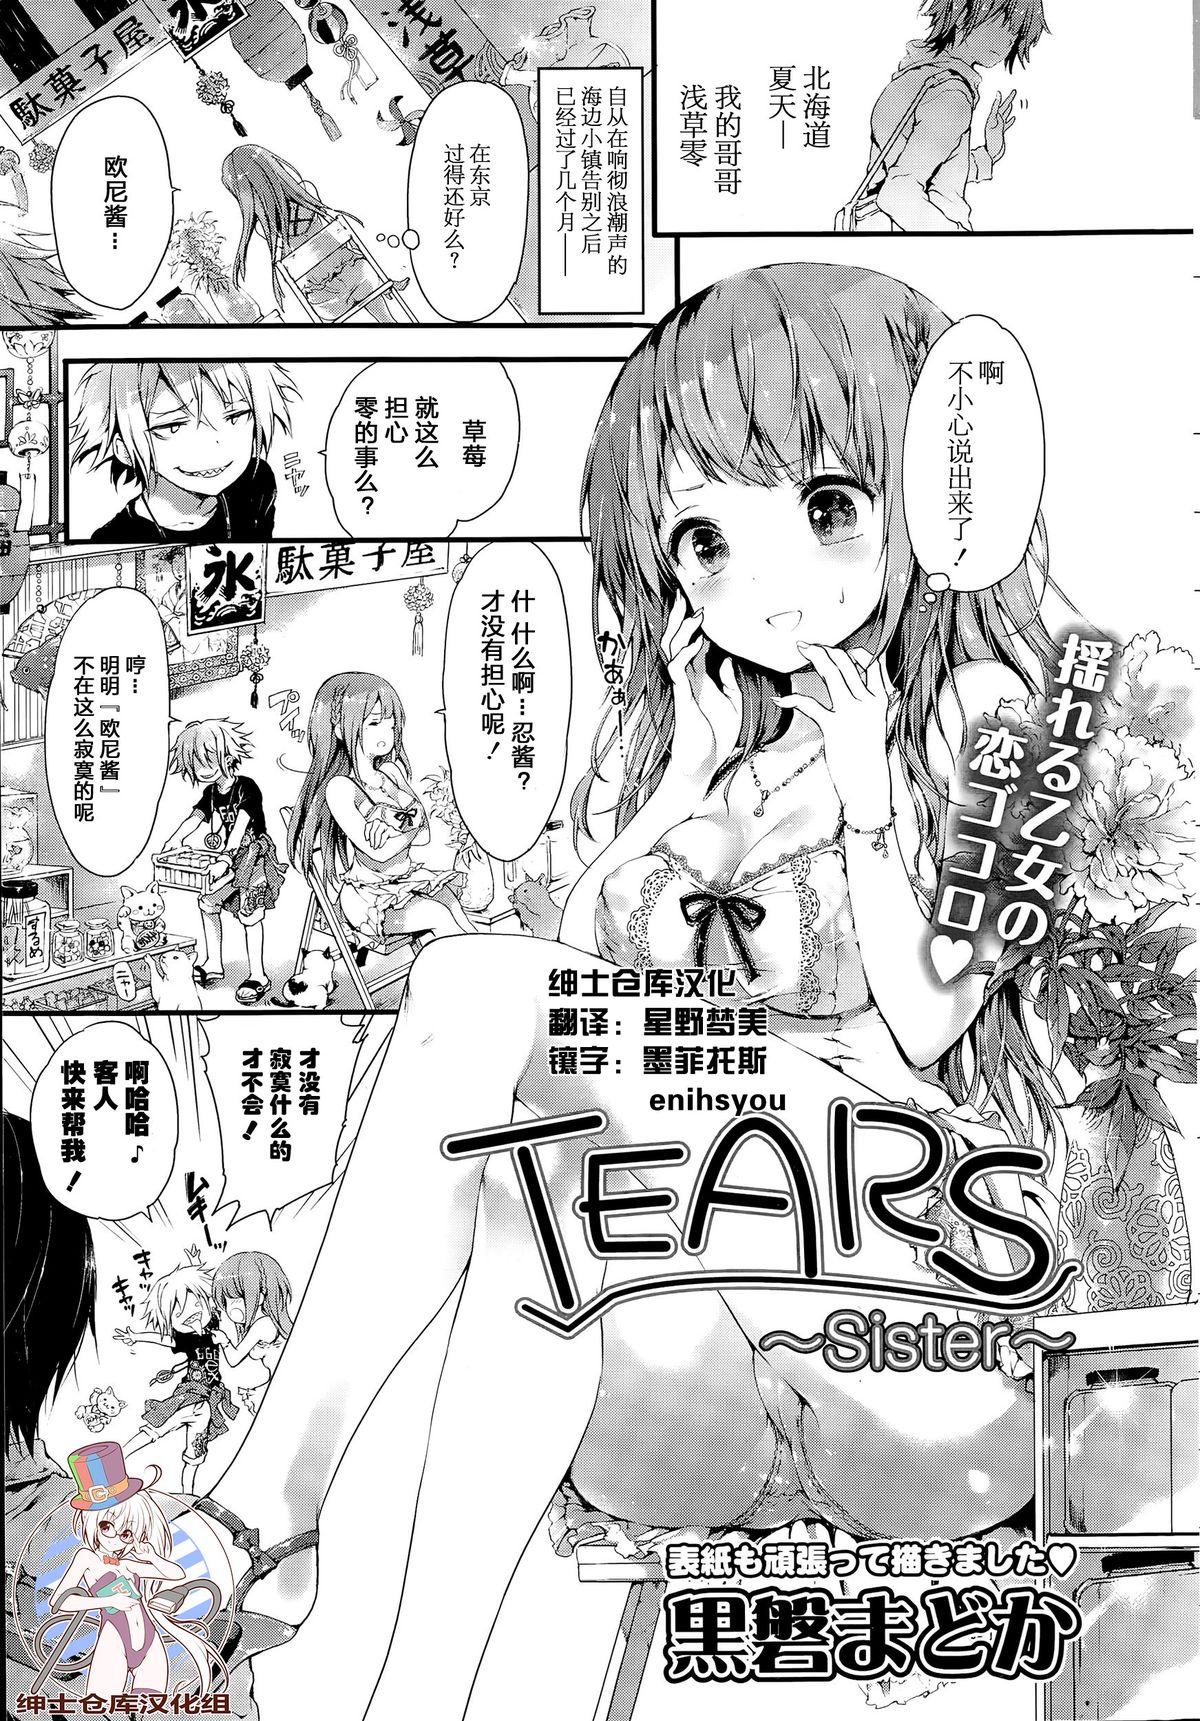 18 Year Old TEARS Ride - Page 1